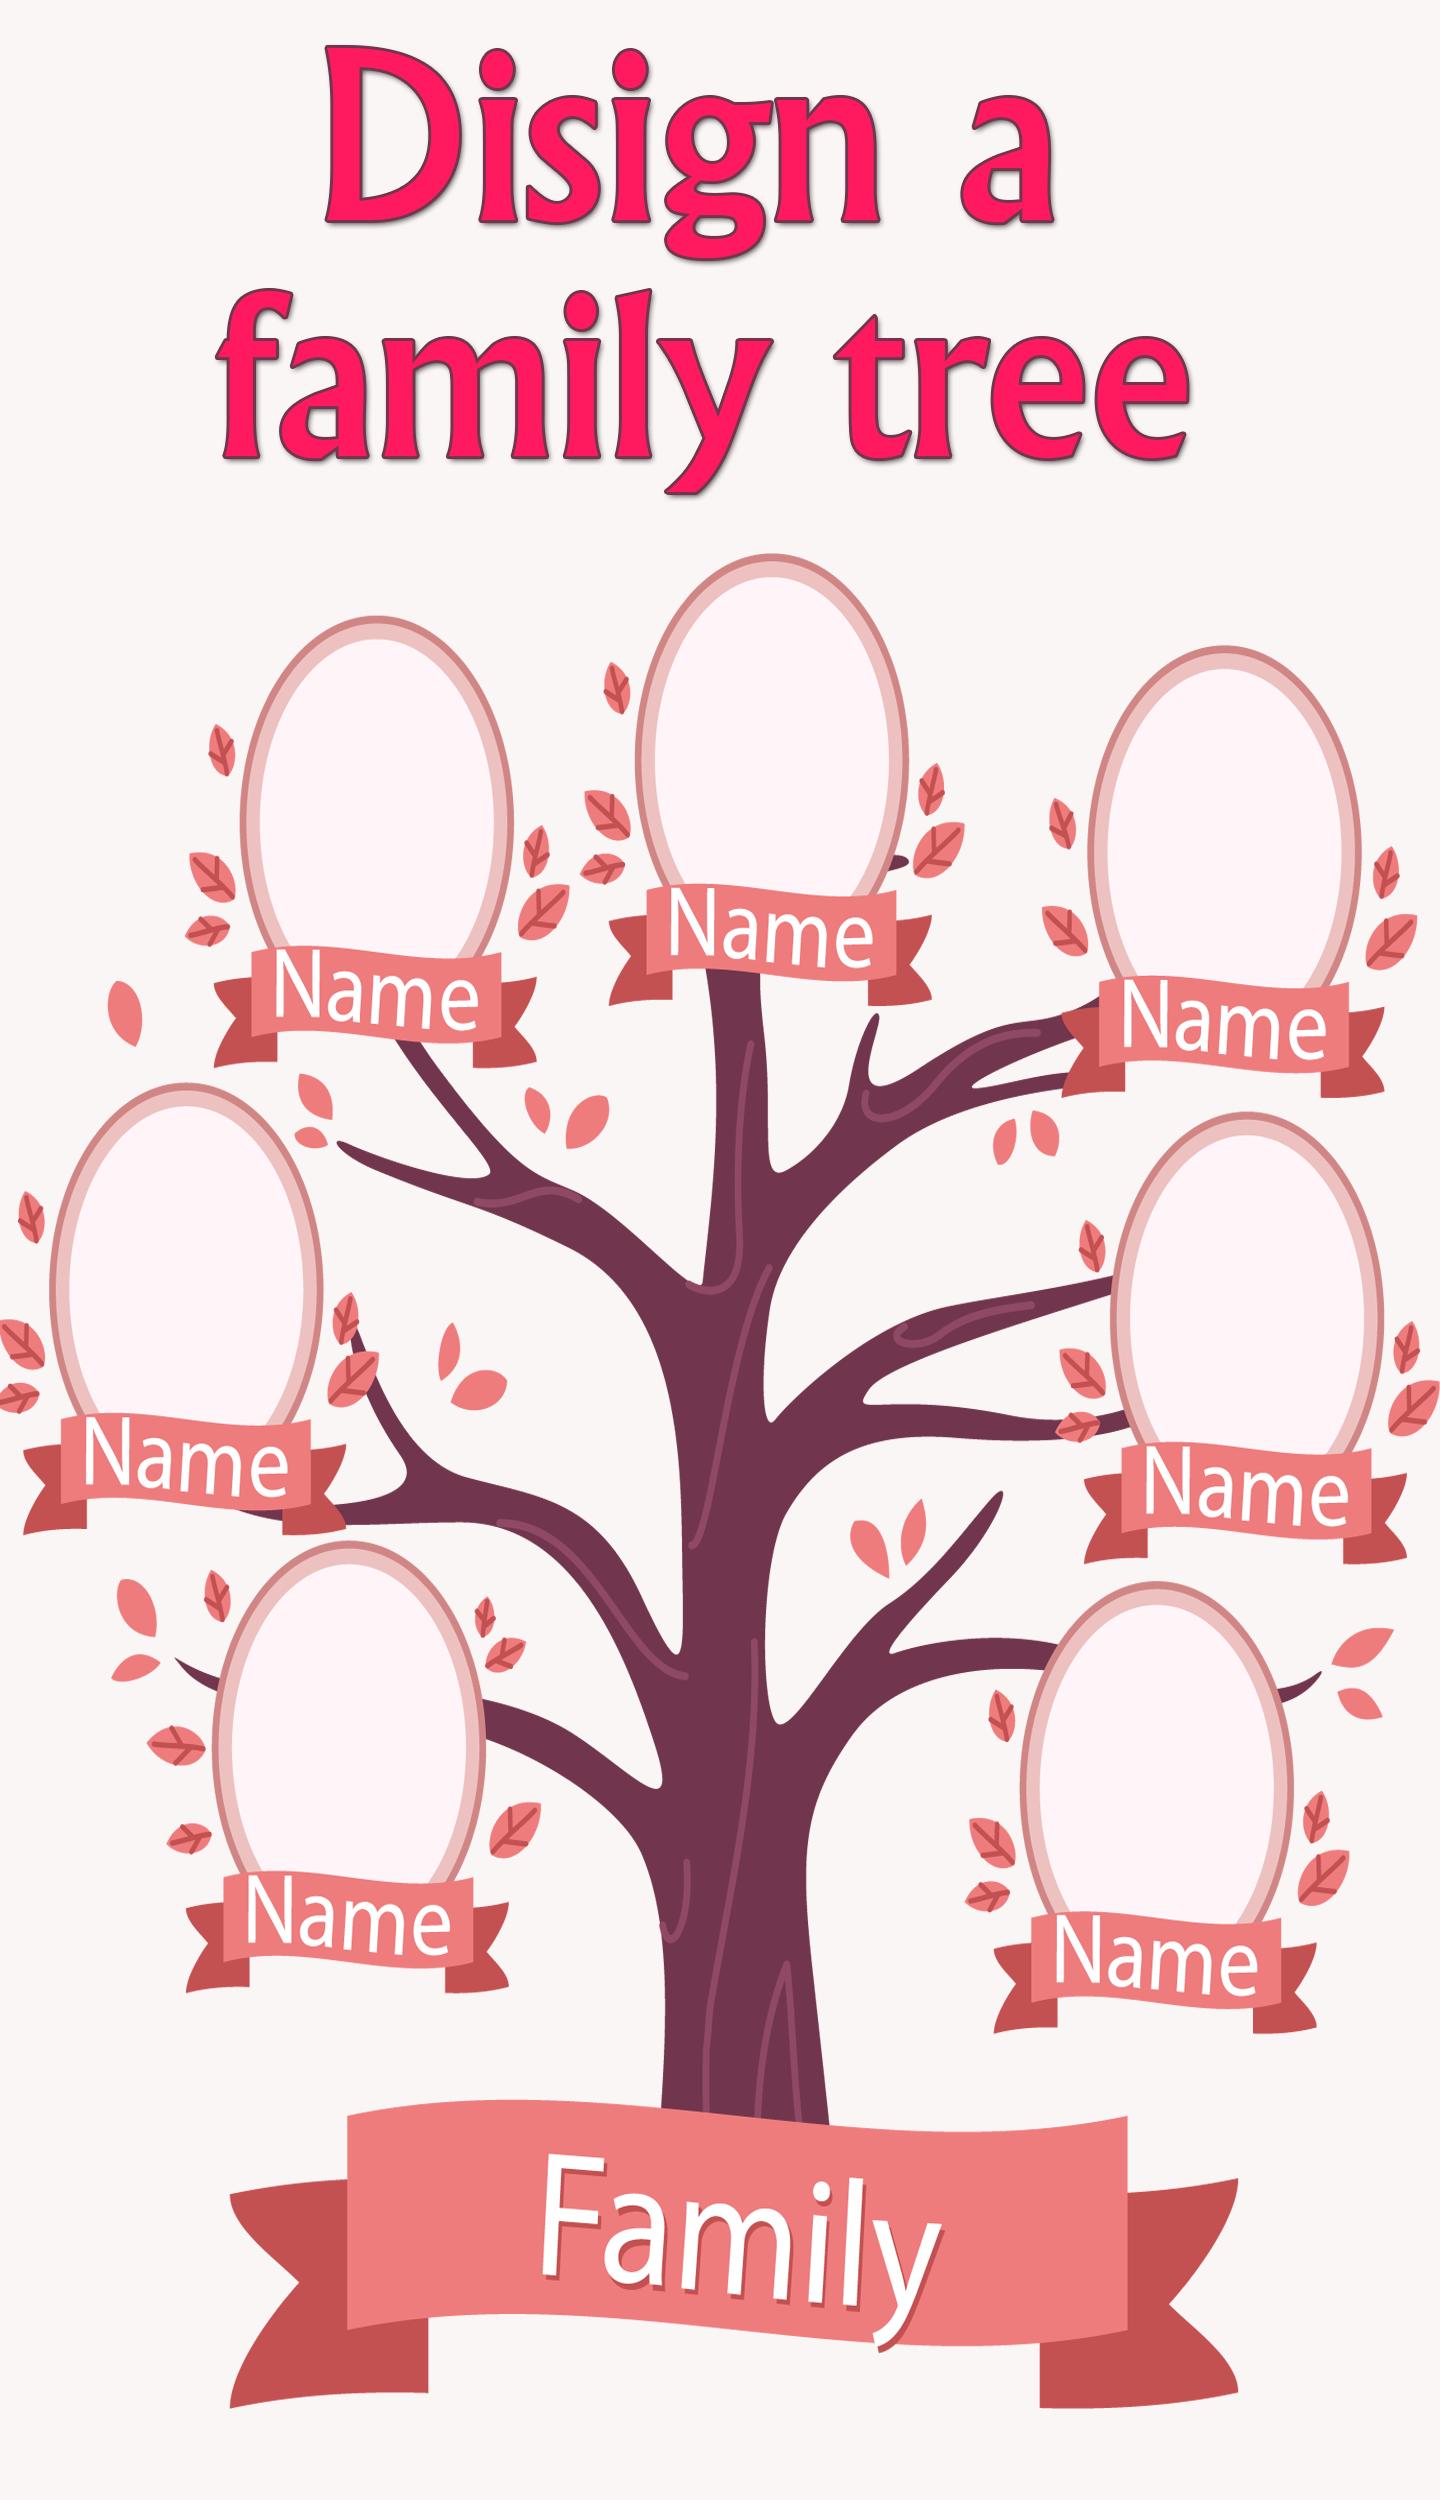 Family Tree Design A Family Tree Free For Android Apk Download